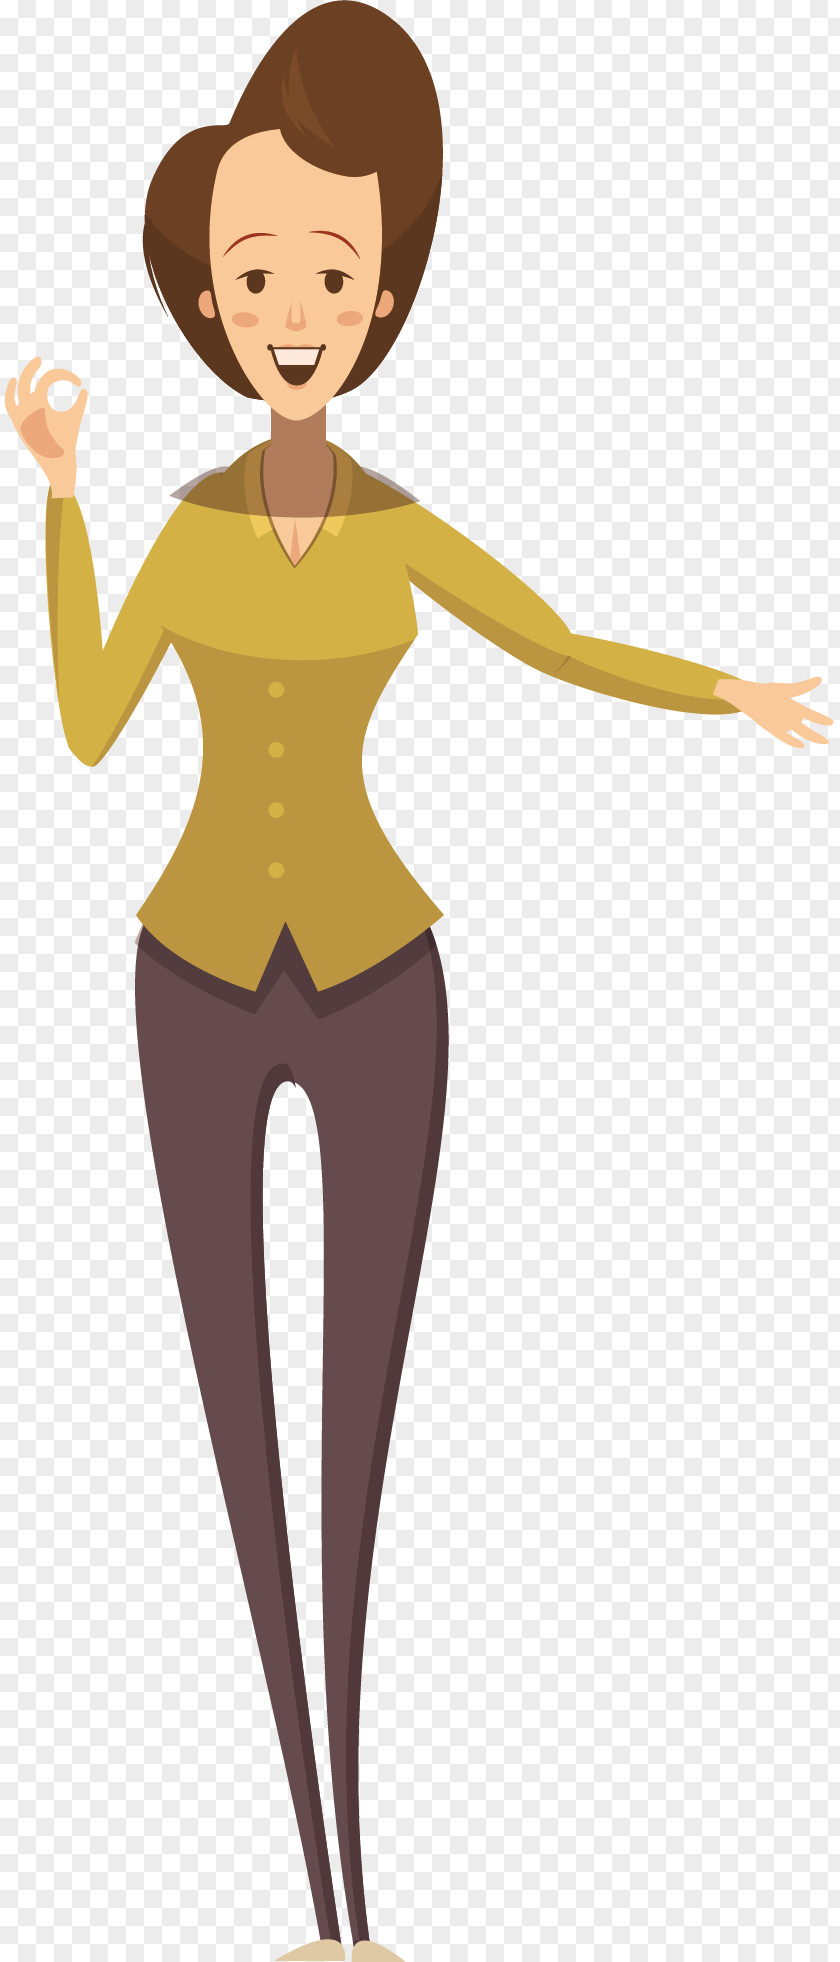 A Yellow Dress Clerk Cartoon Icon PNG